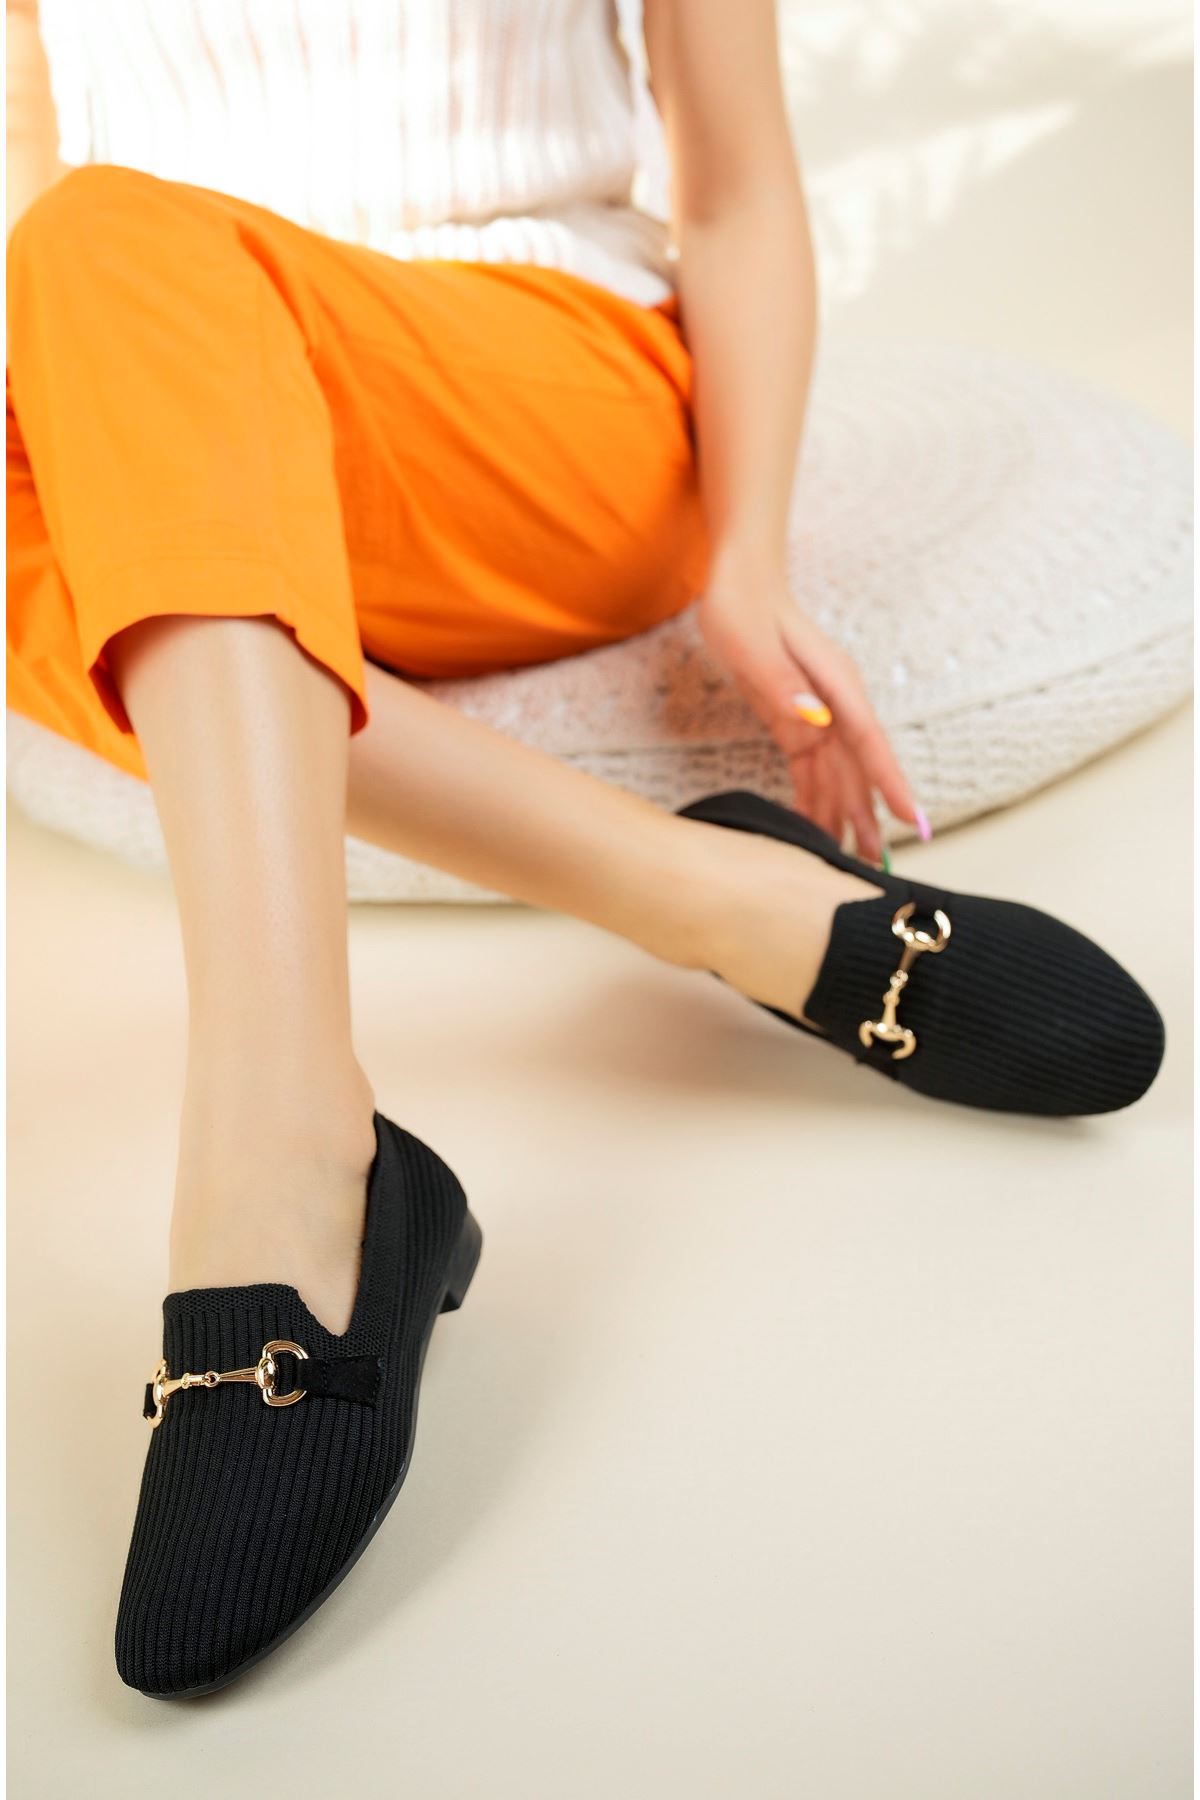 Heeled Molded Buckle Tricot Black Babet